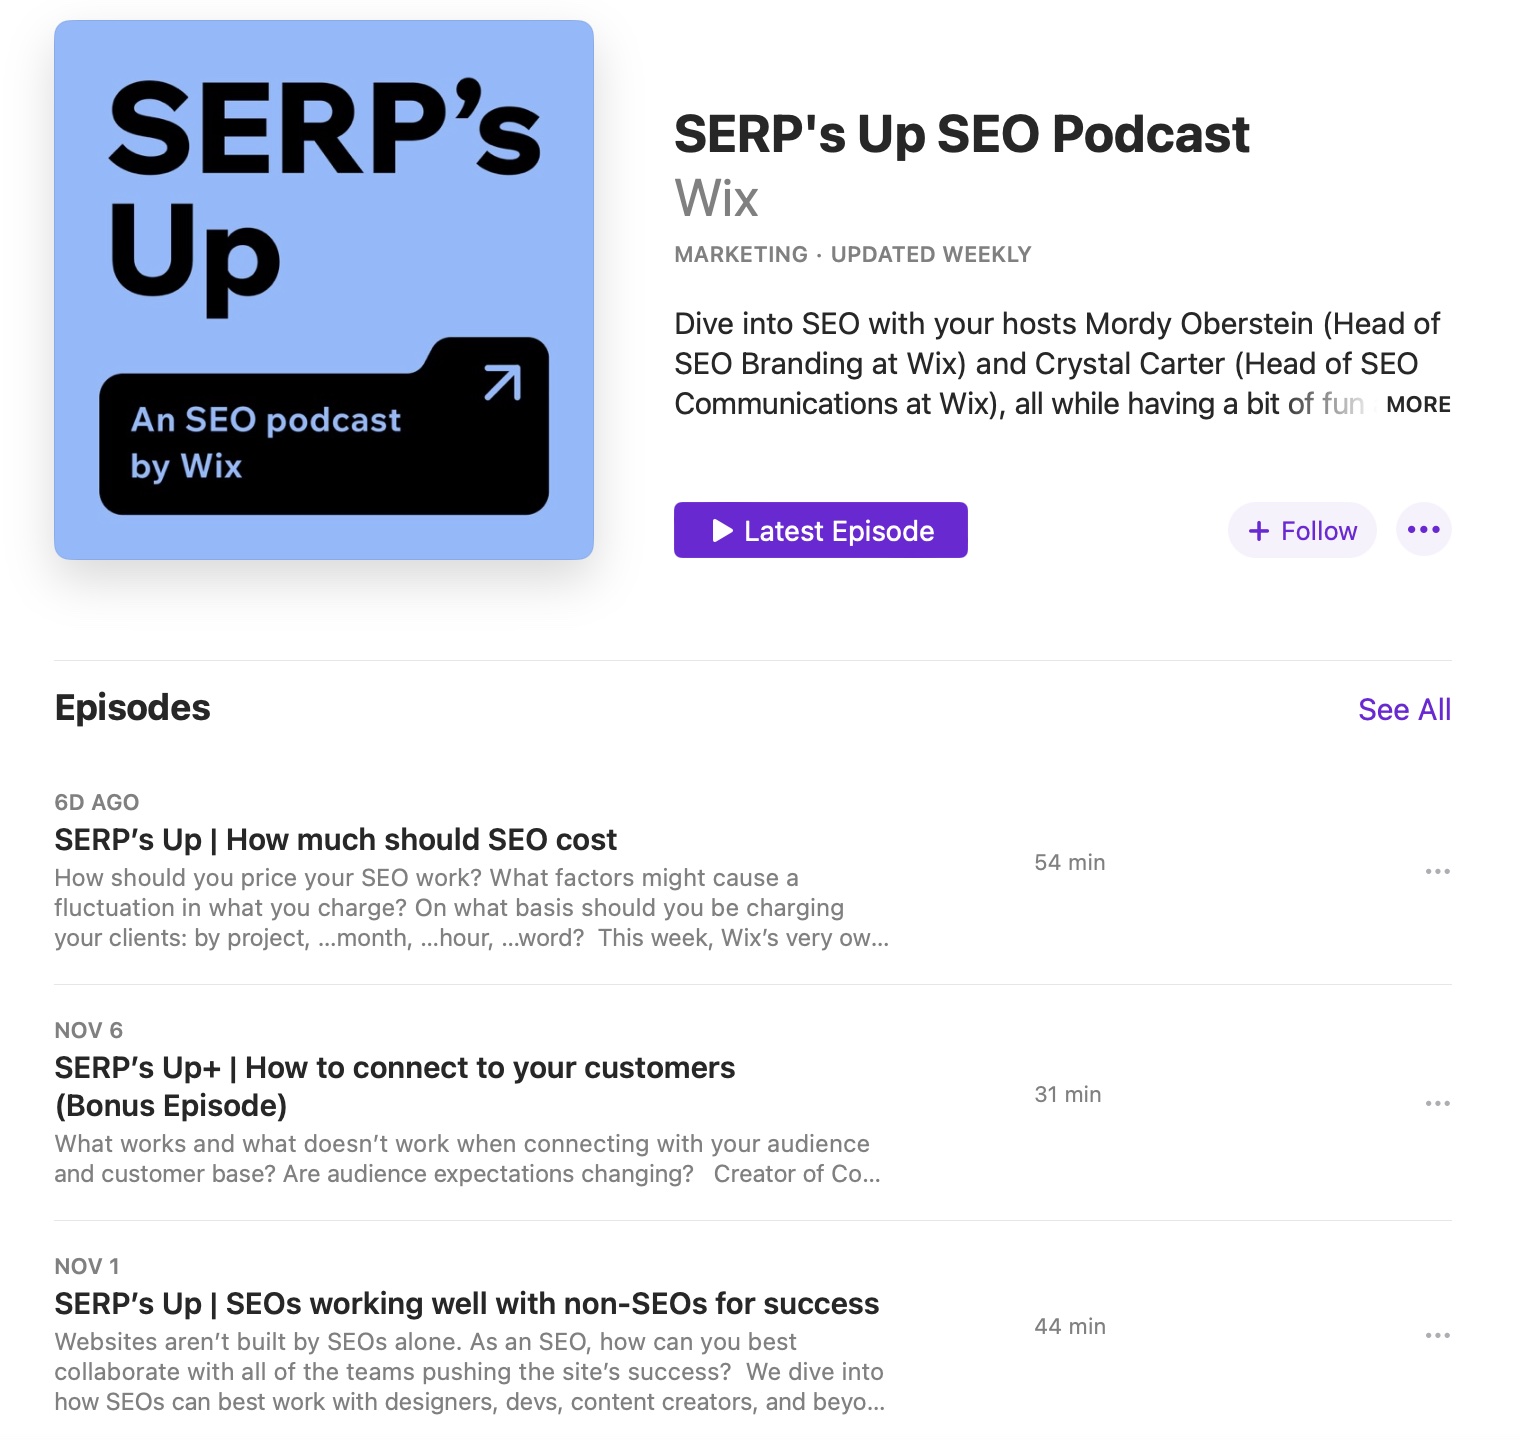 SERP’s Up SEO Podcast page